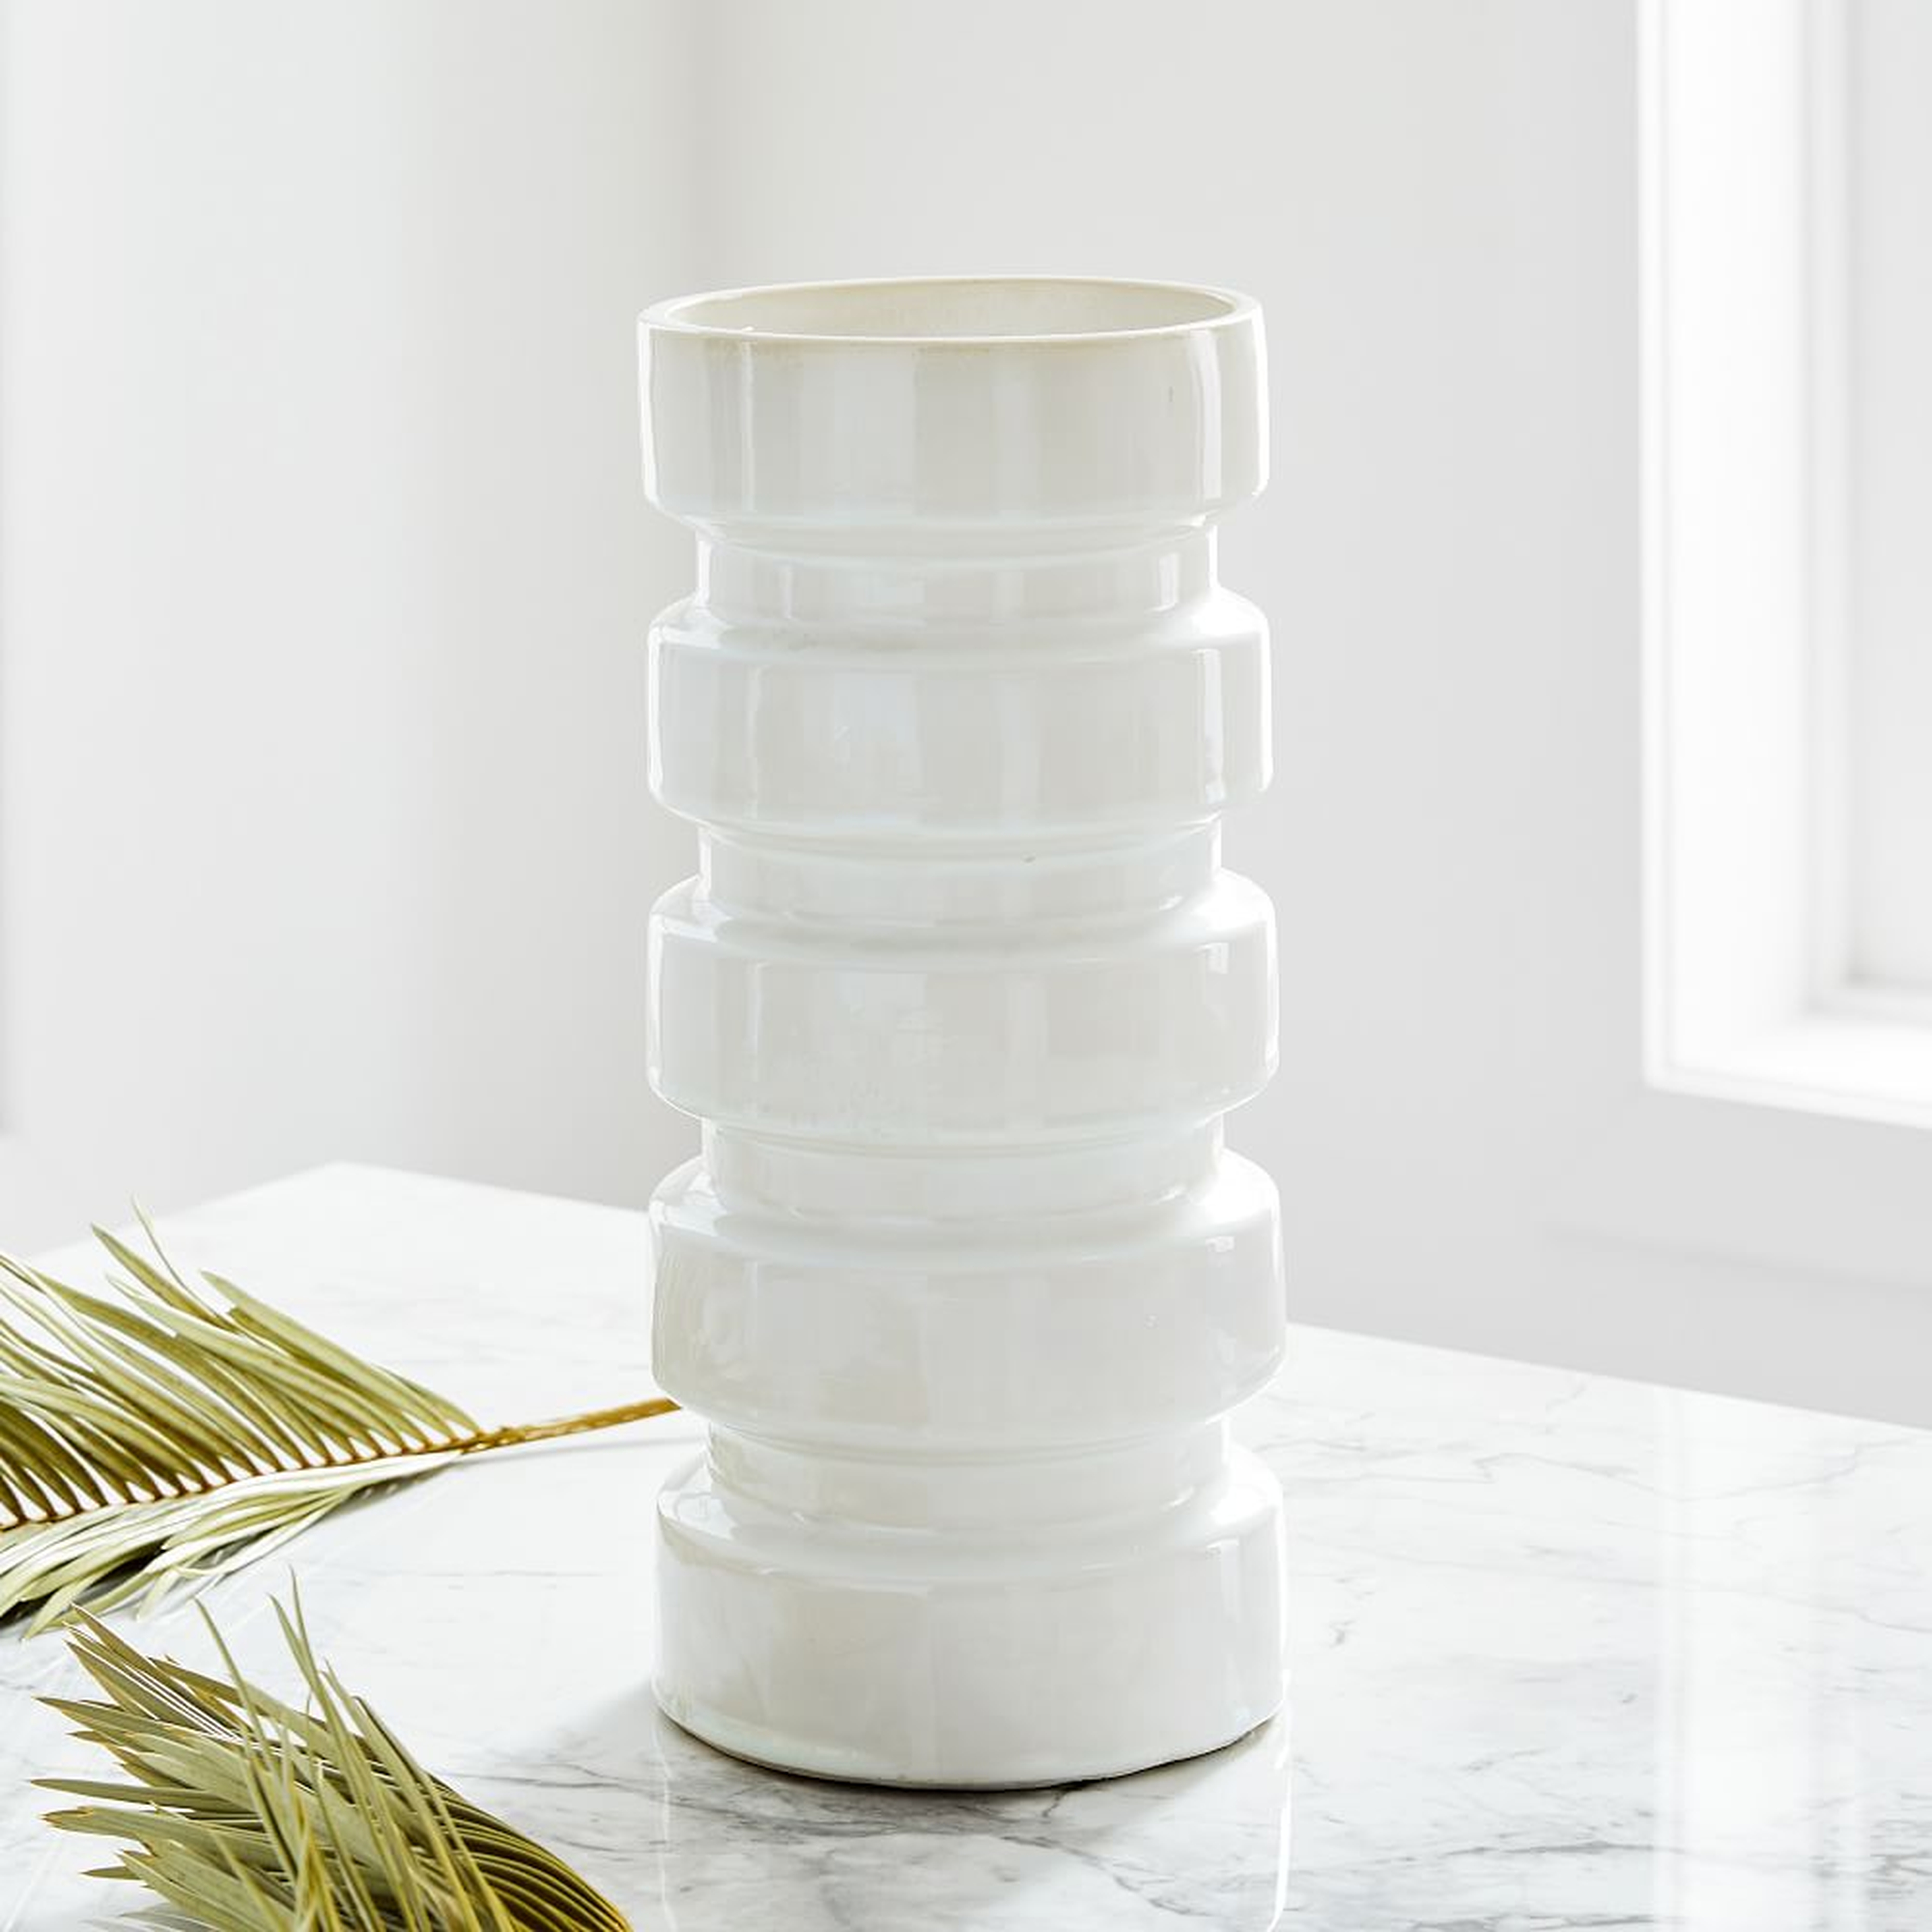 Stepped Form Ceramic Square Stacked, Transculent White - West Elm